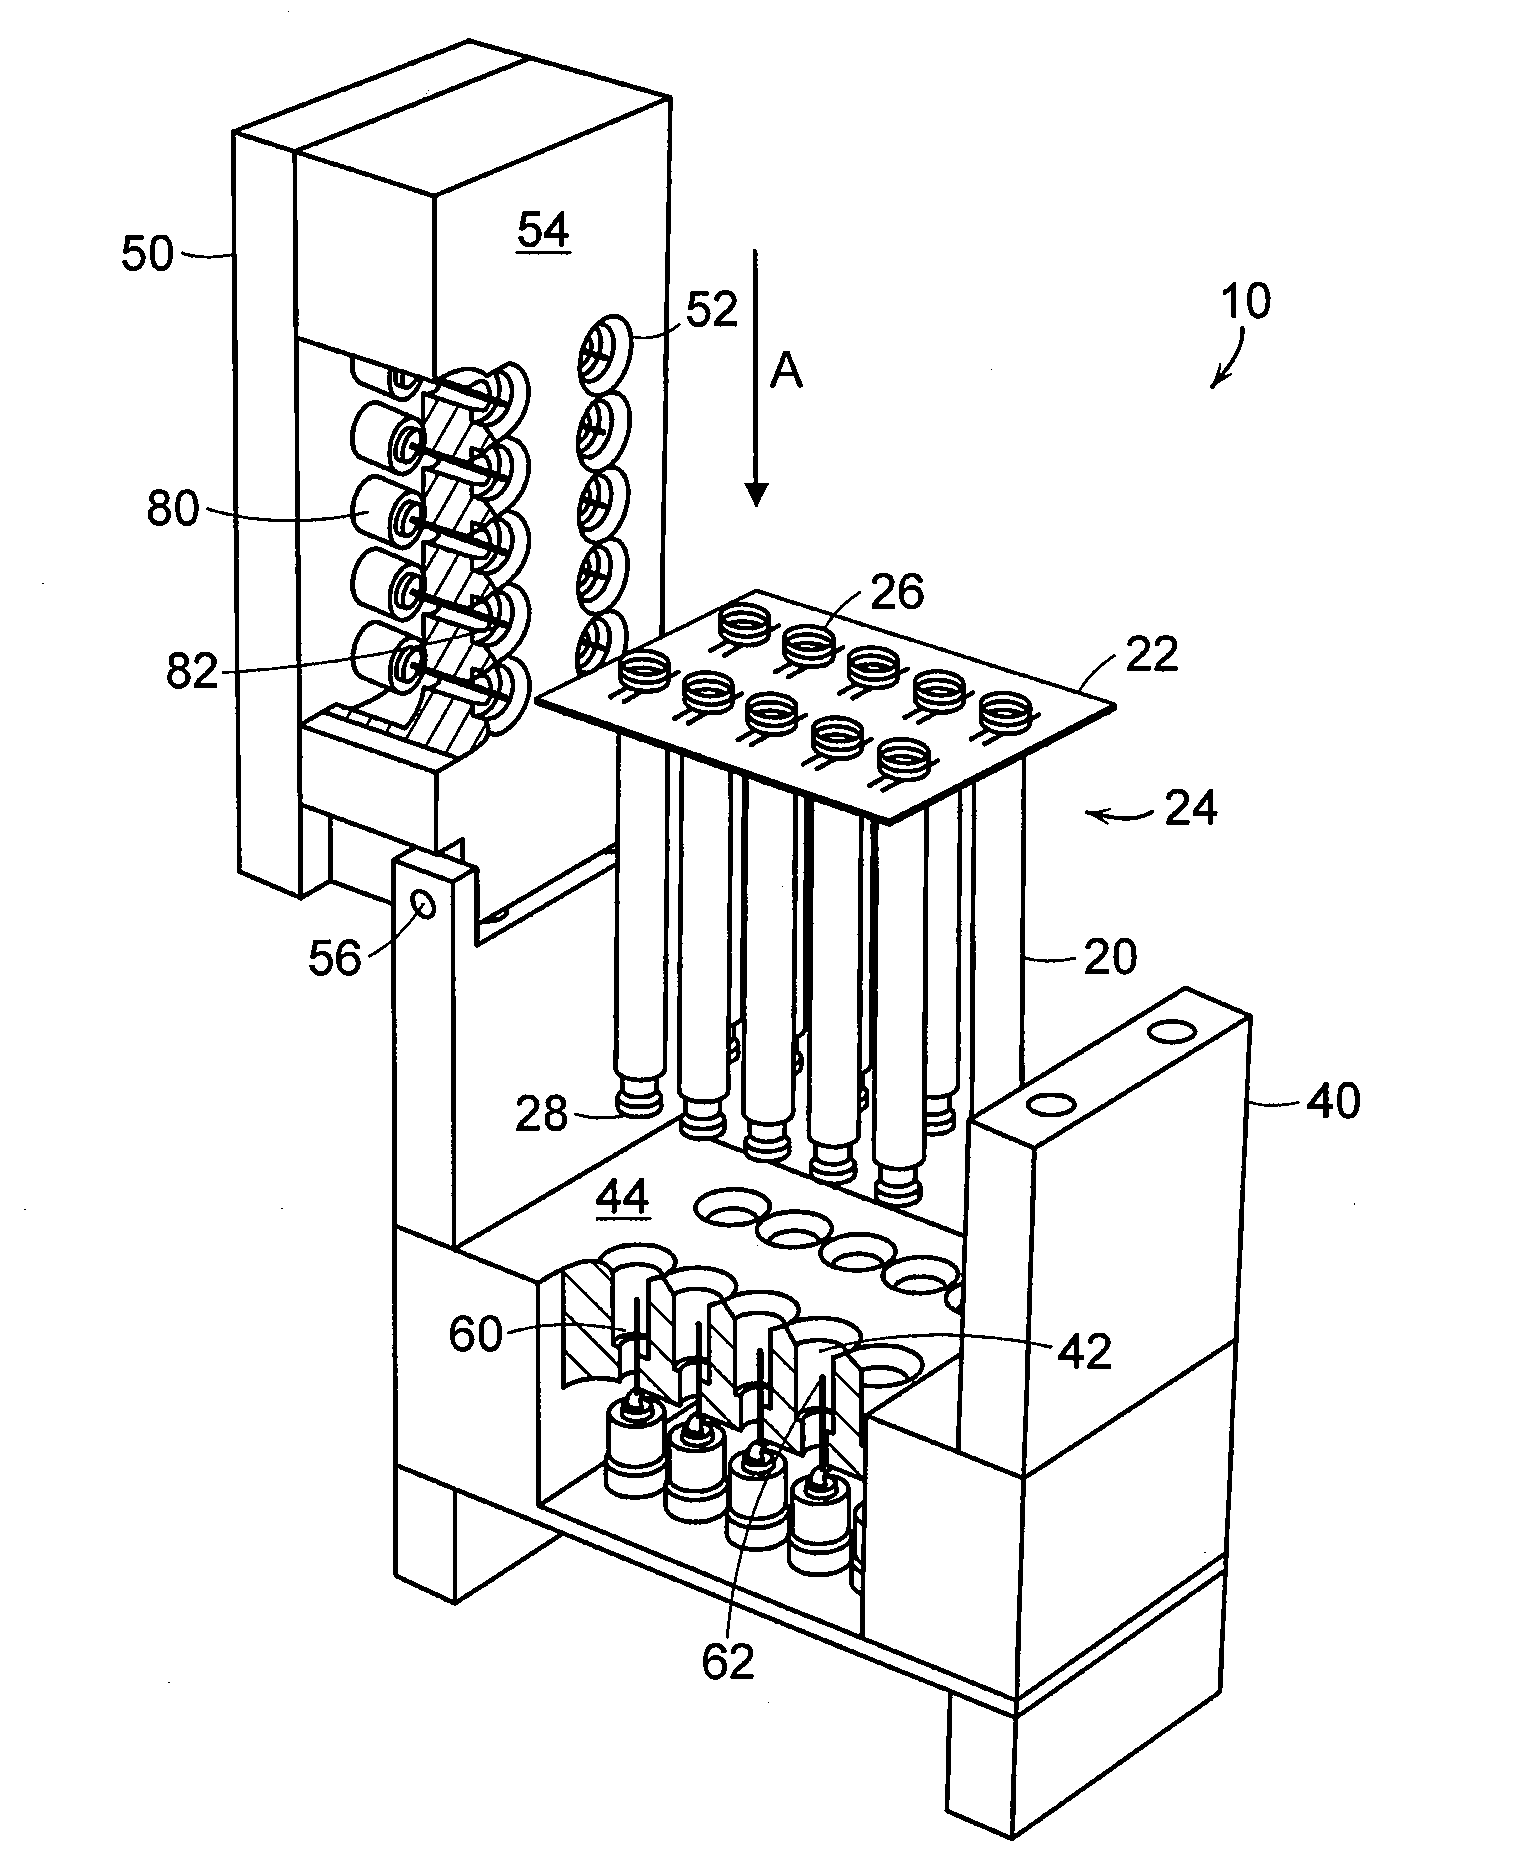 Liquid Handling System and Methods for Mixing and Delivering Liquid Reagents